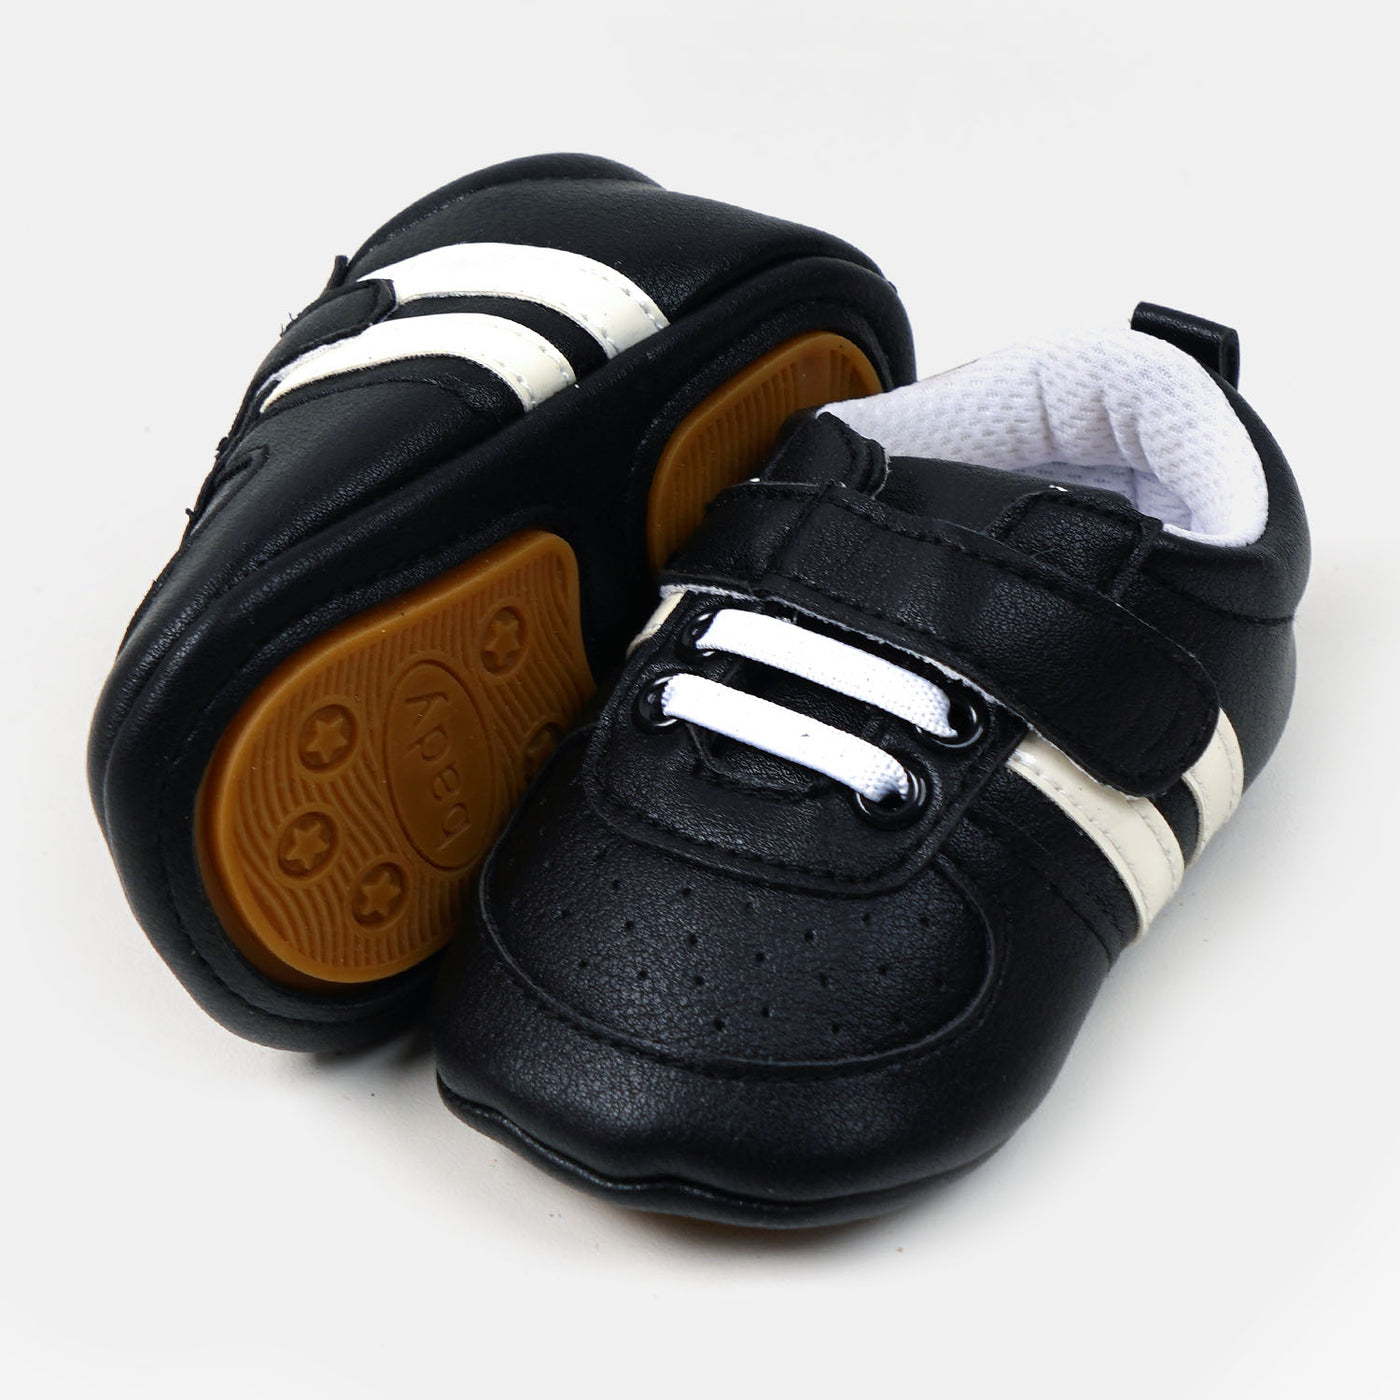 Infant Baby Boys Shoes